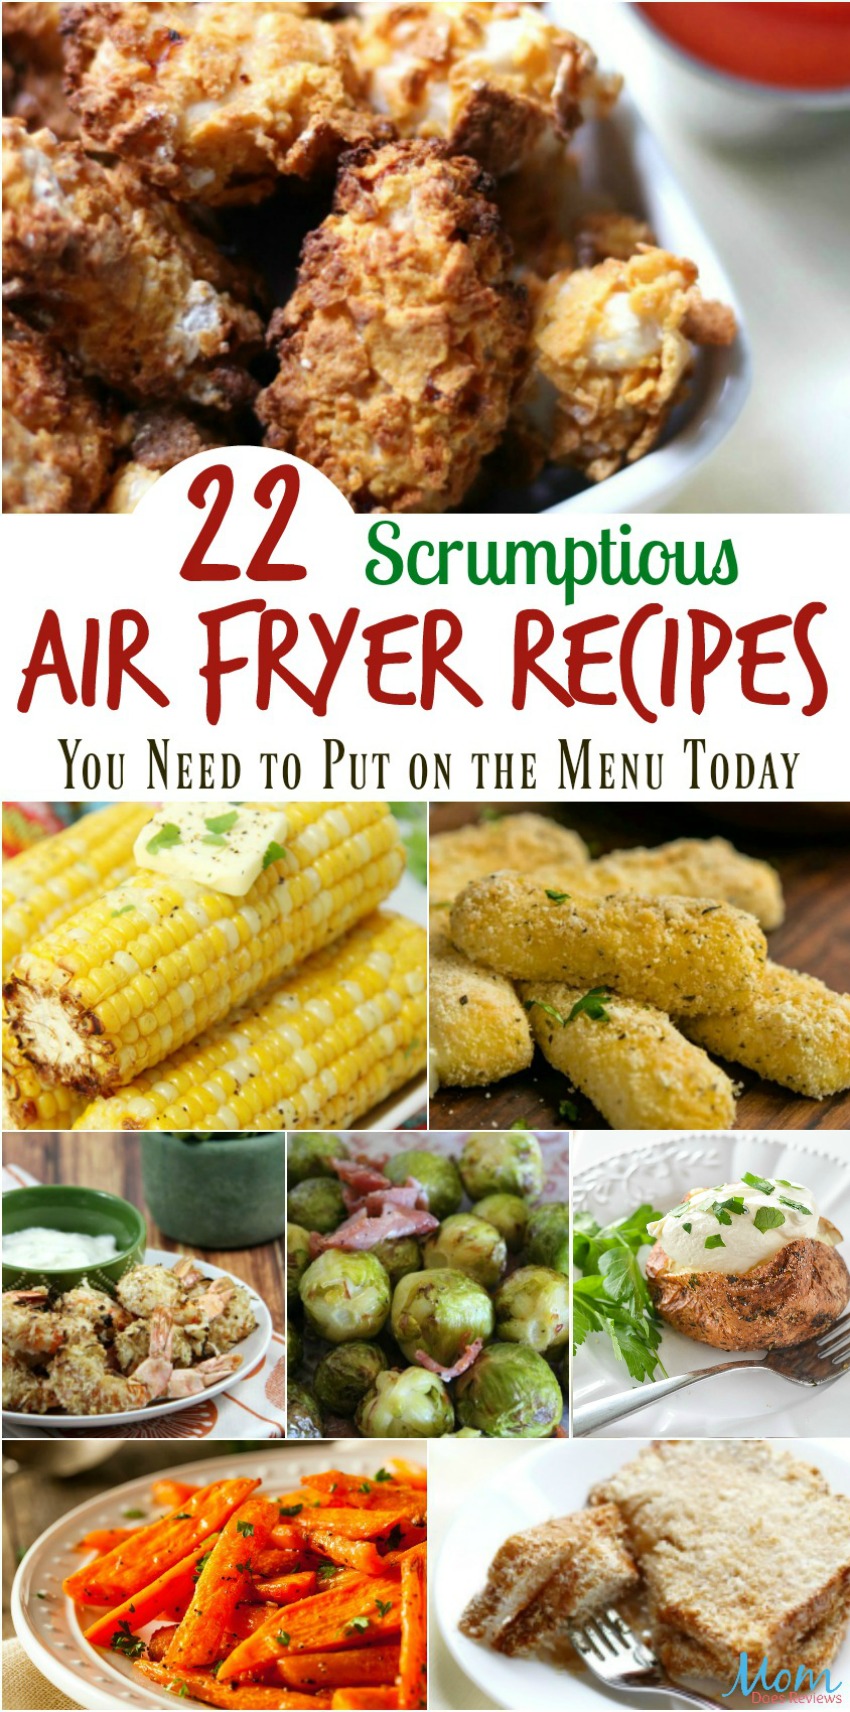 22 Scrumptious Air Fryer Recipes You Need to Put on the Menu Today